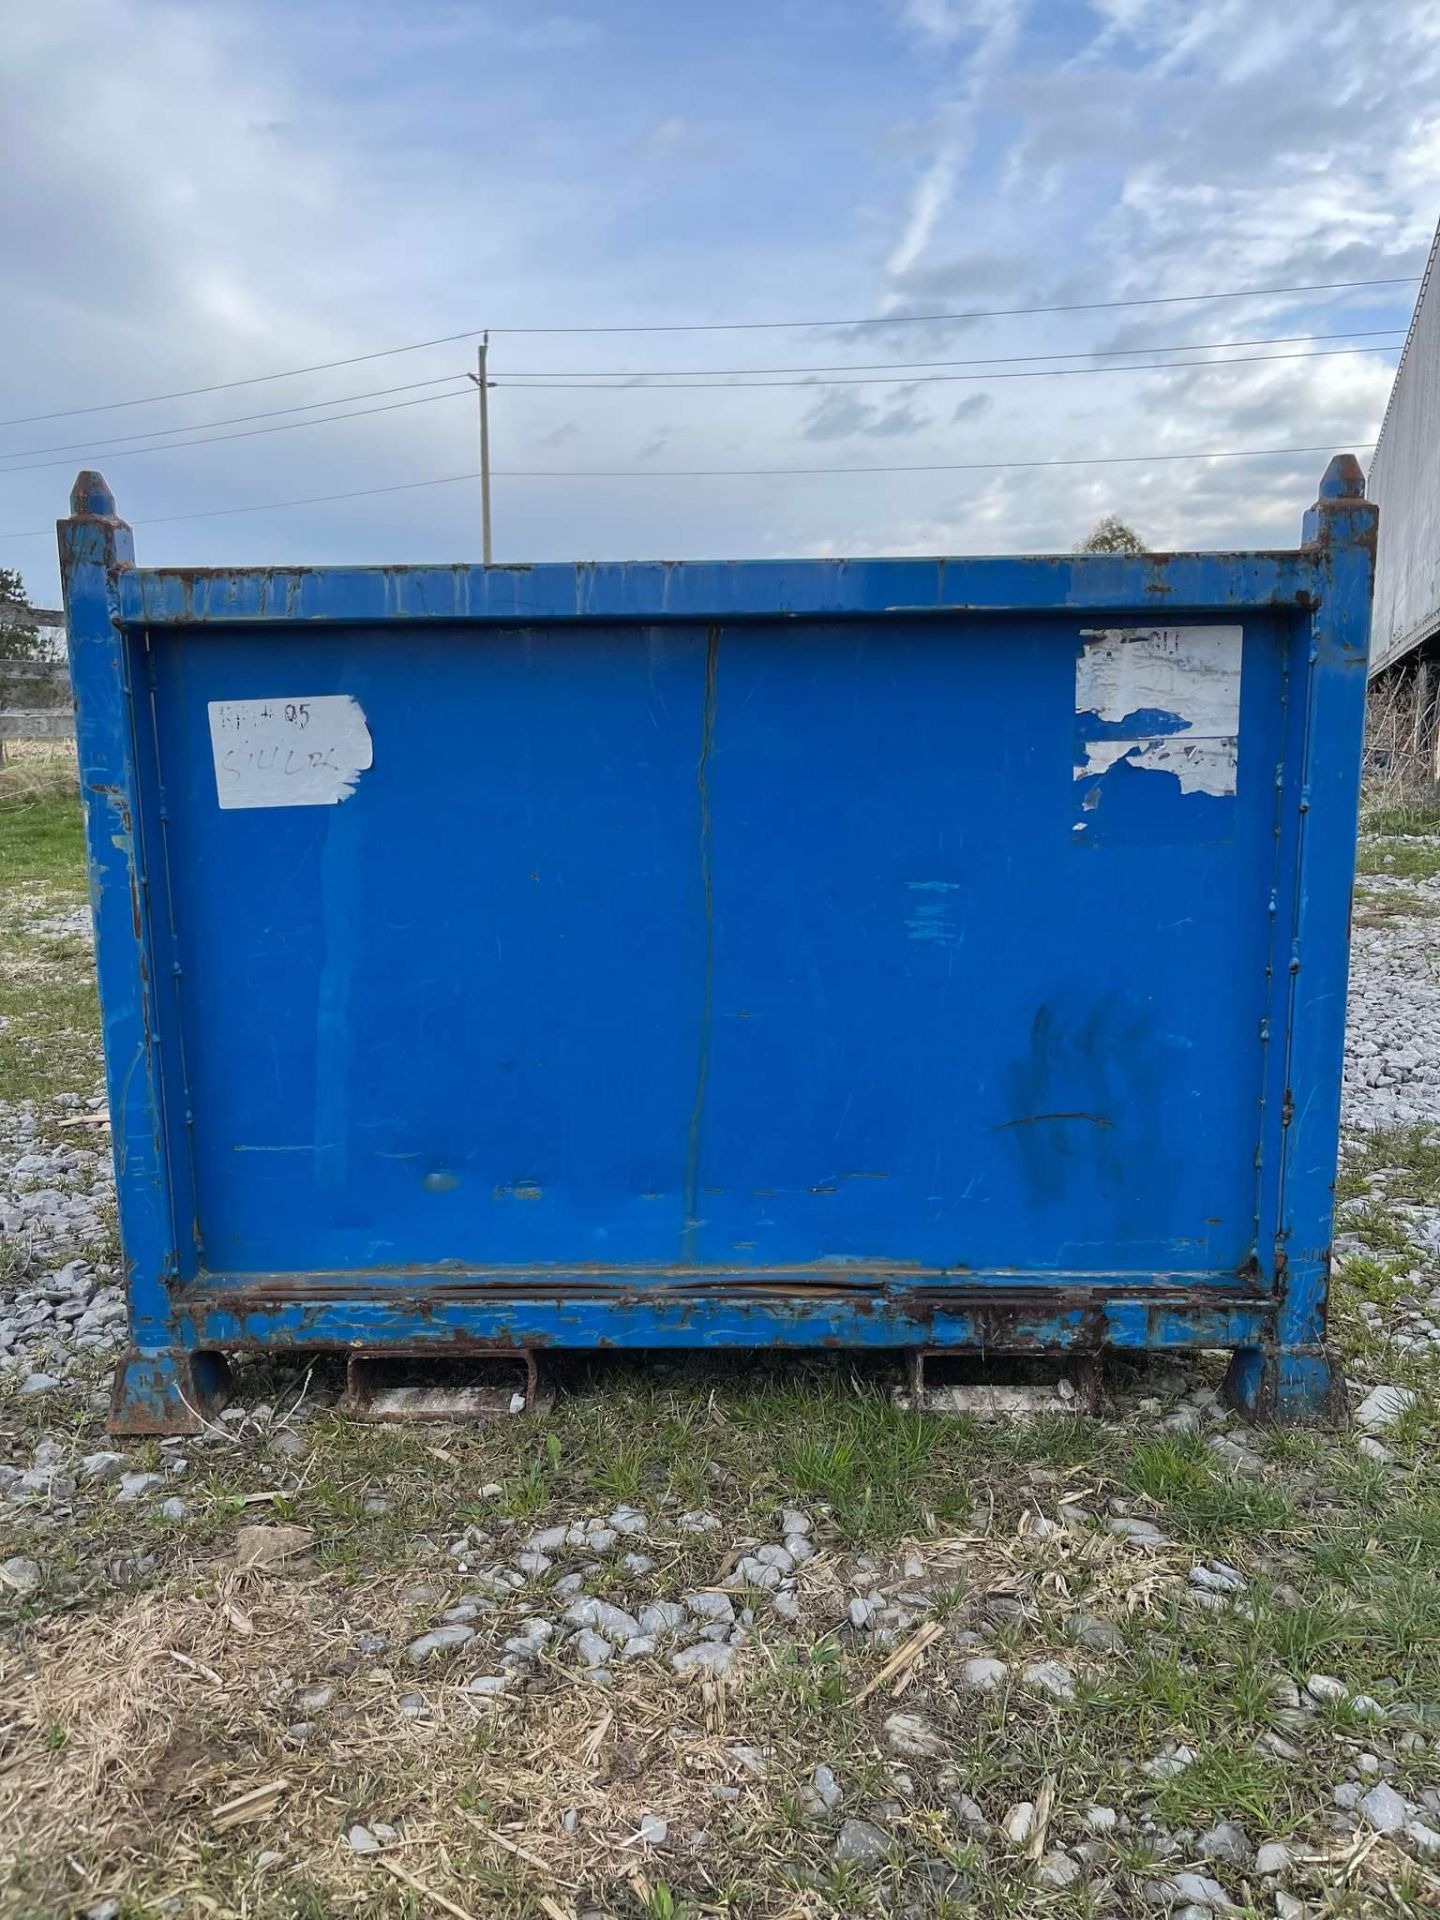 STEEL TOTE BIN W/ FORKLIFT POCKETS, APPROX. 9'9"L X 4'1"W X 2'6"H (LOCATED IN BRANTFORD, ON) - Image 2 of 4